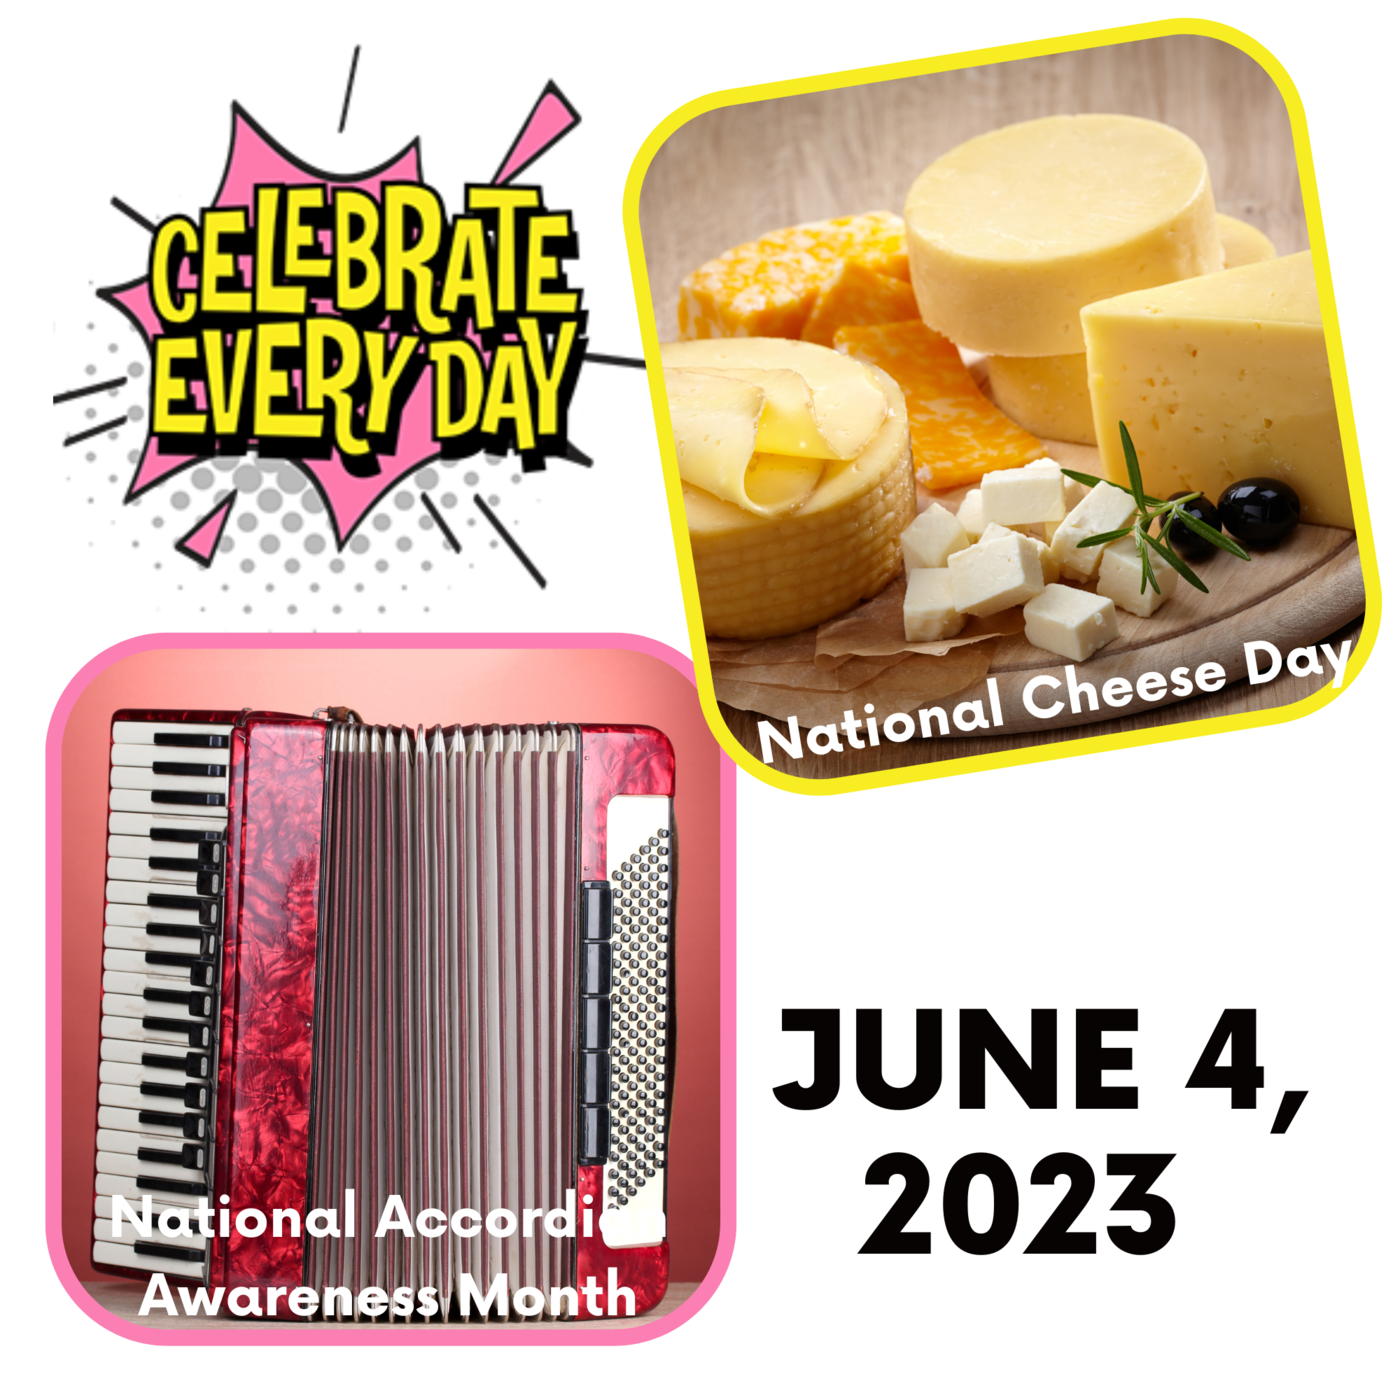 June 4, 2023 - National Accordion Awareness Day | National Cheese Day Image